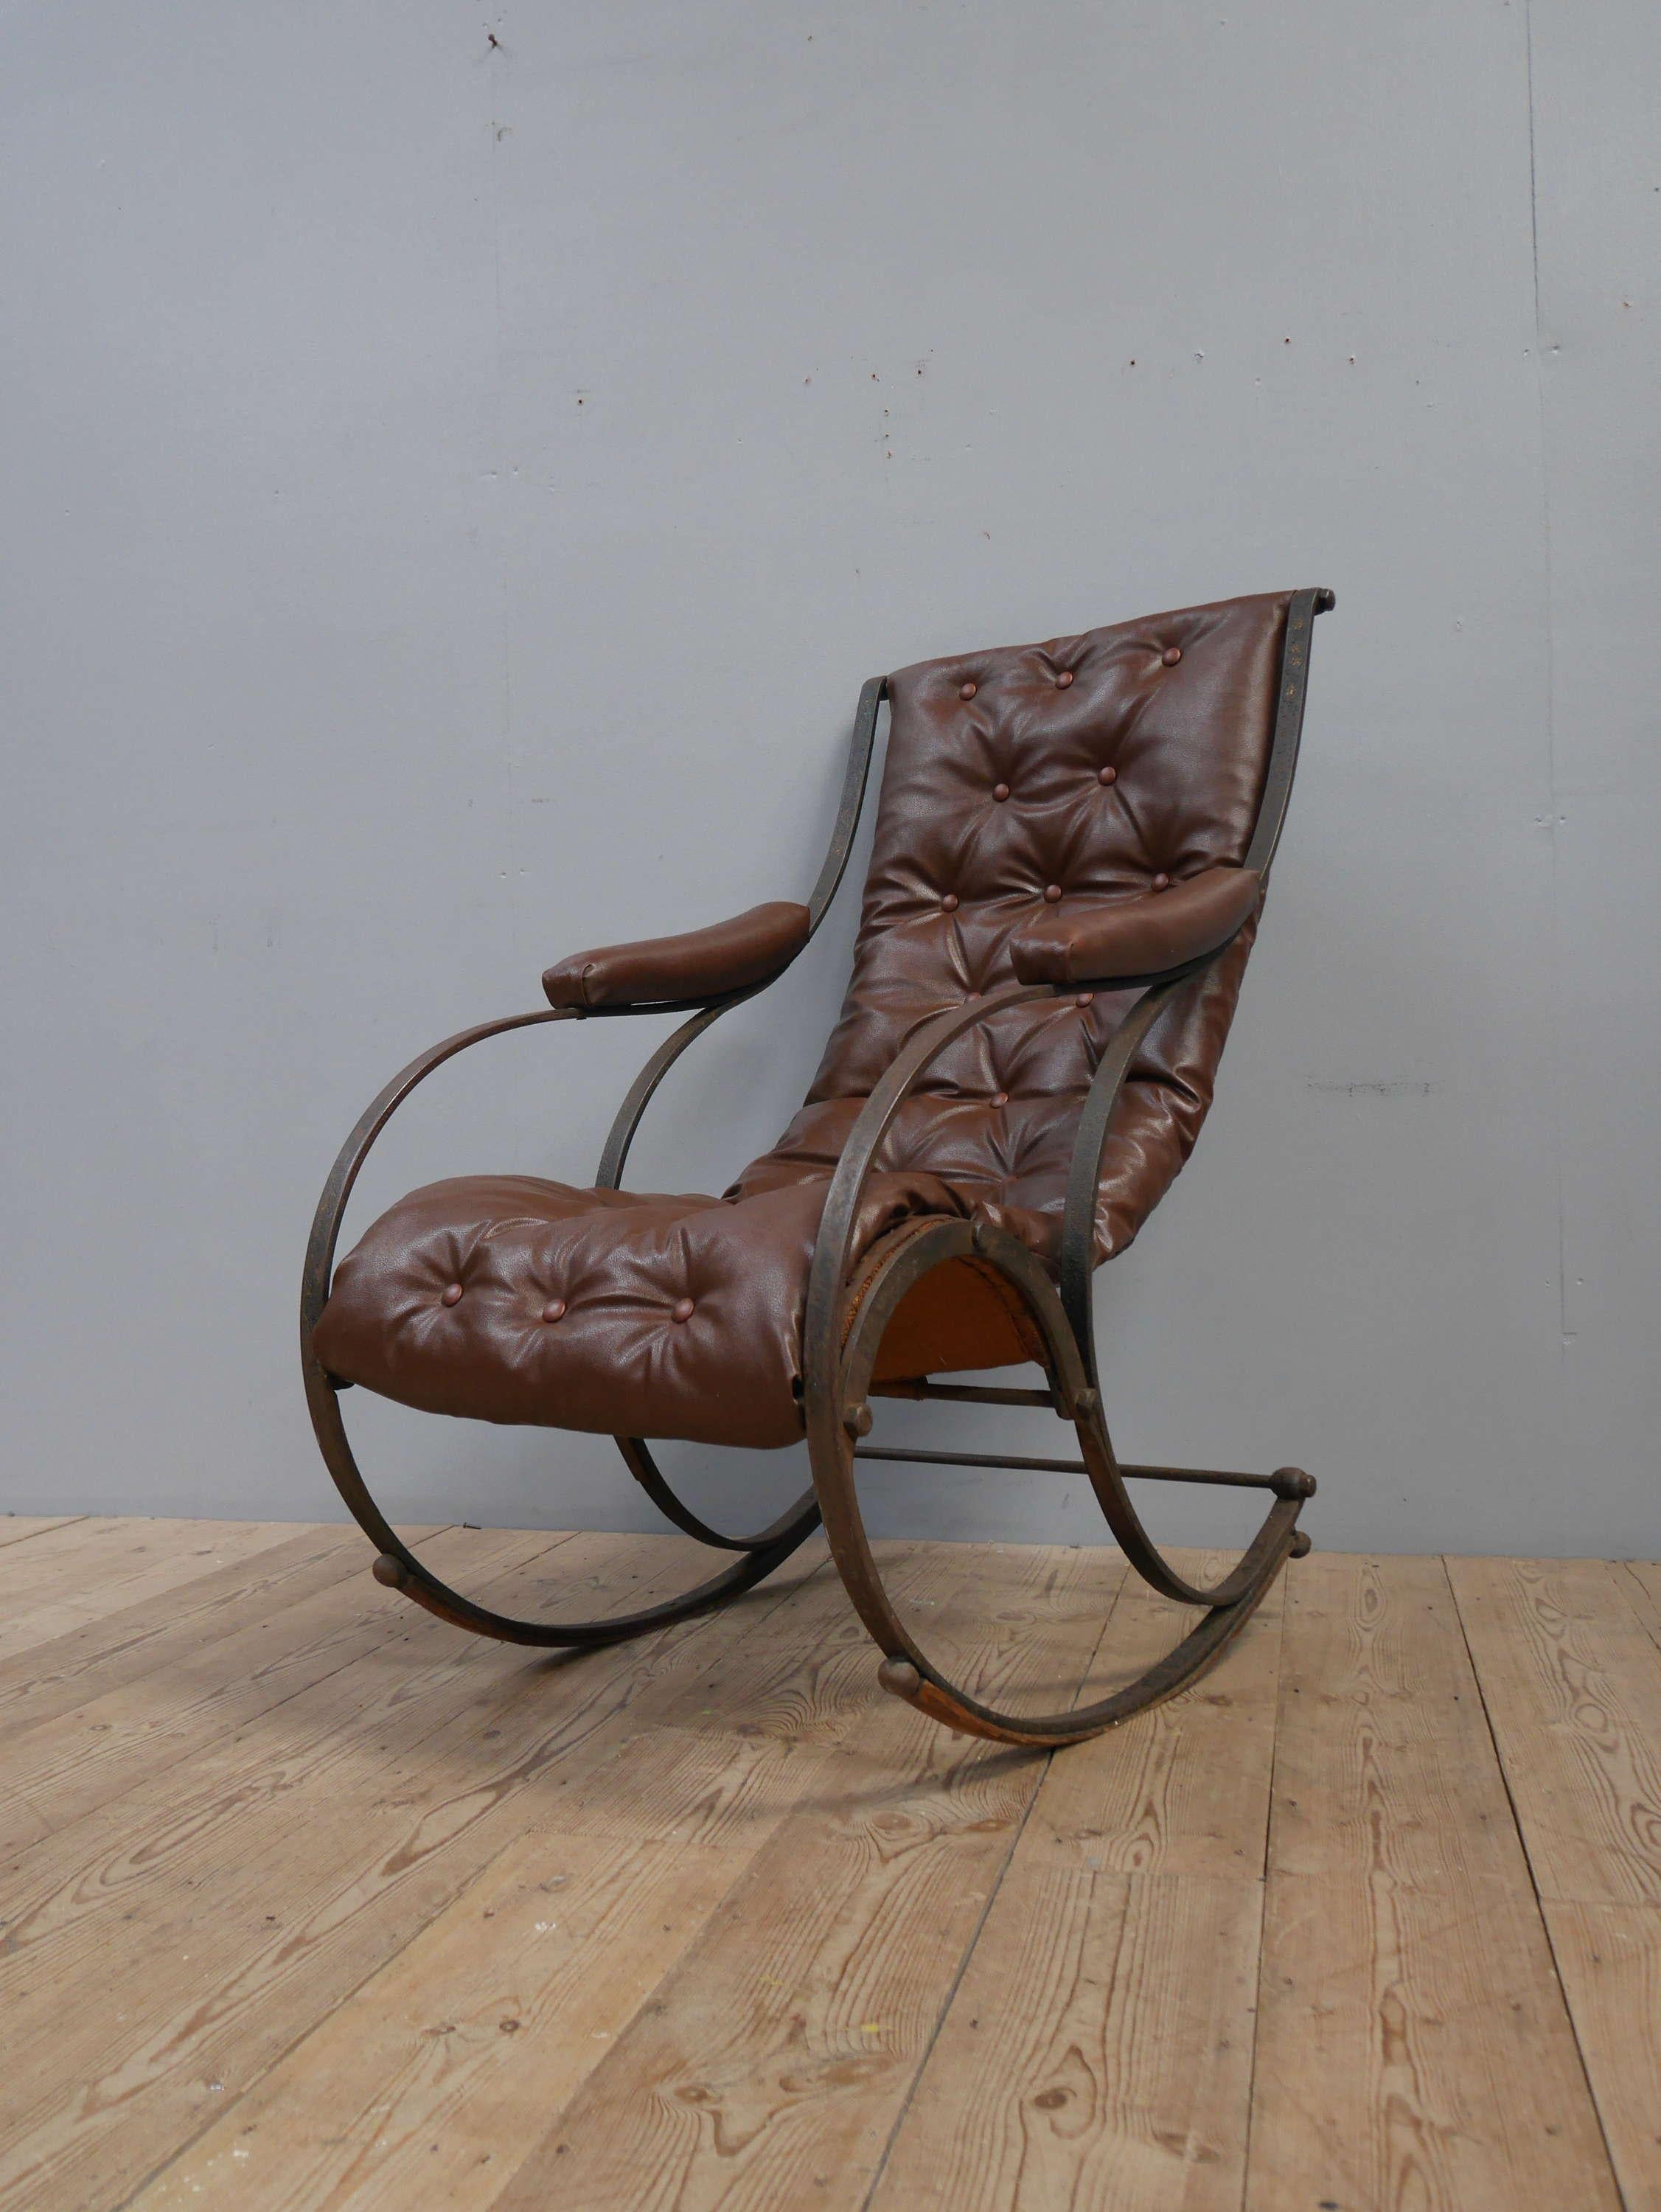 Aesthetic Movement R W Winfield Iron Rocking Chair c1870